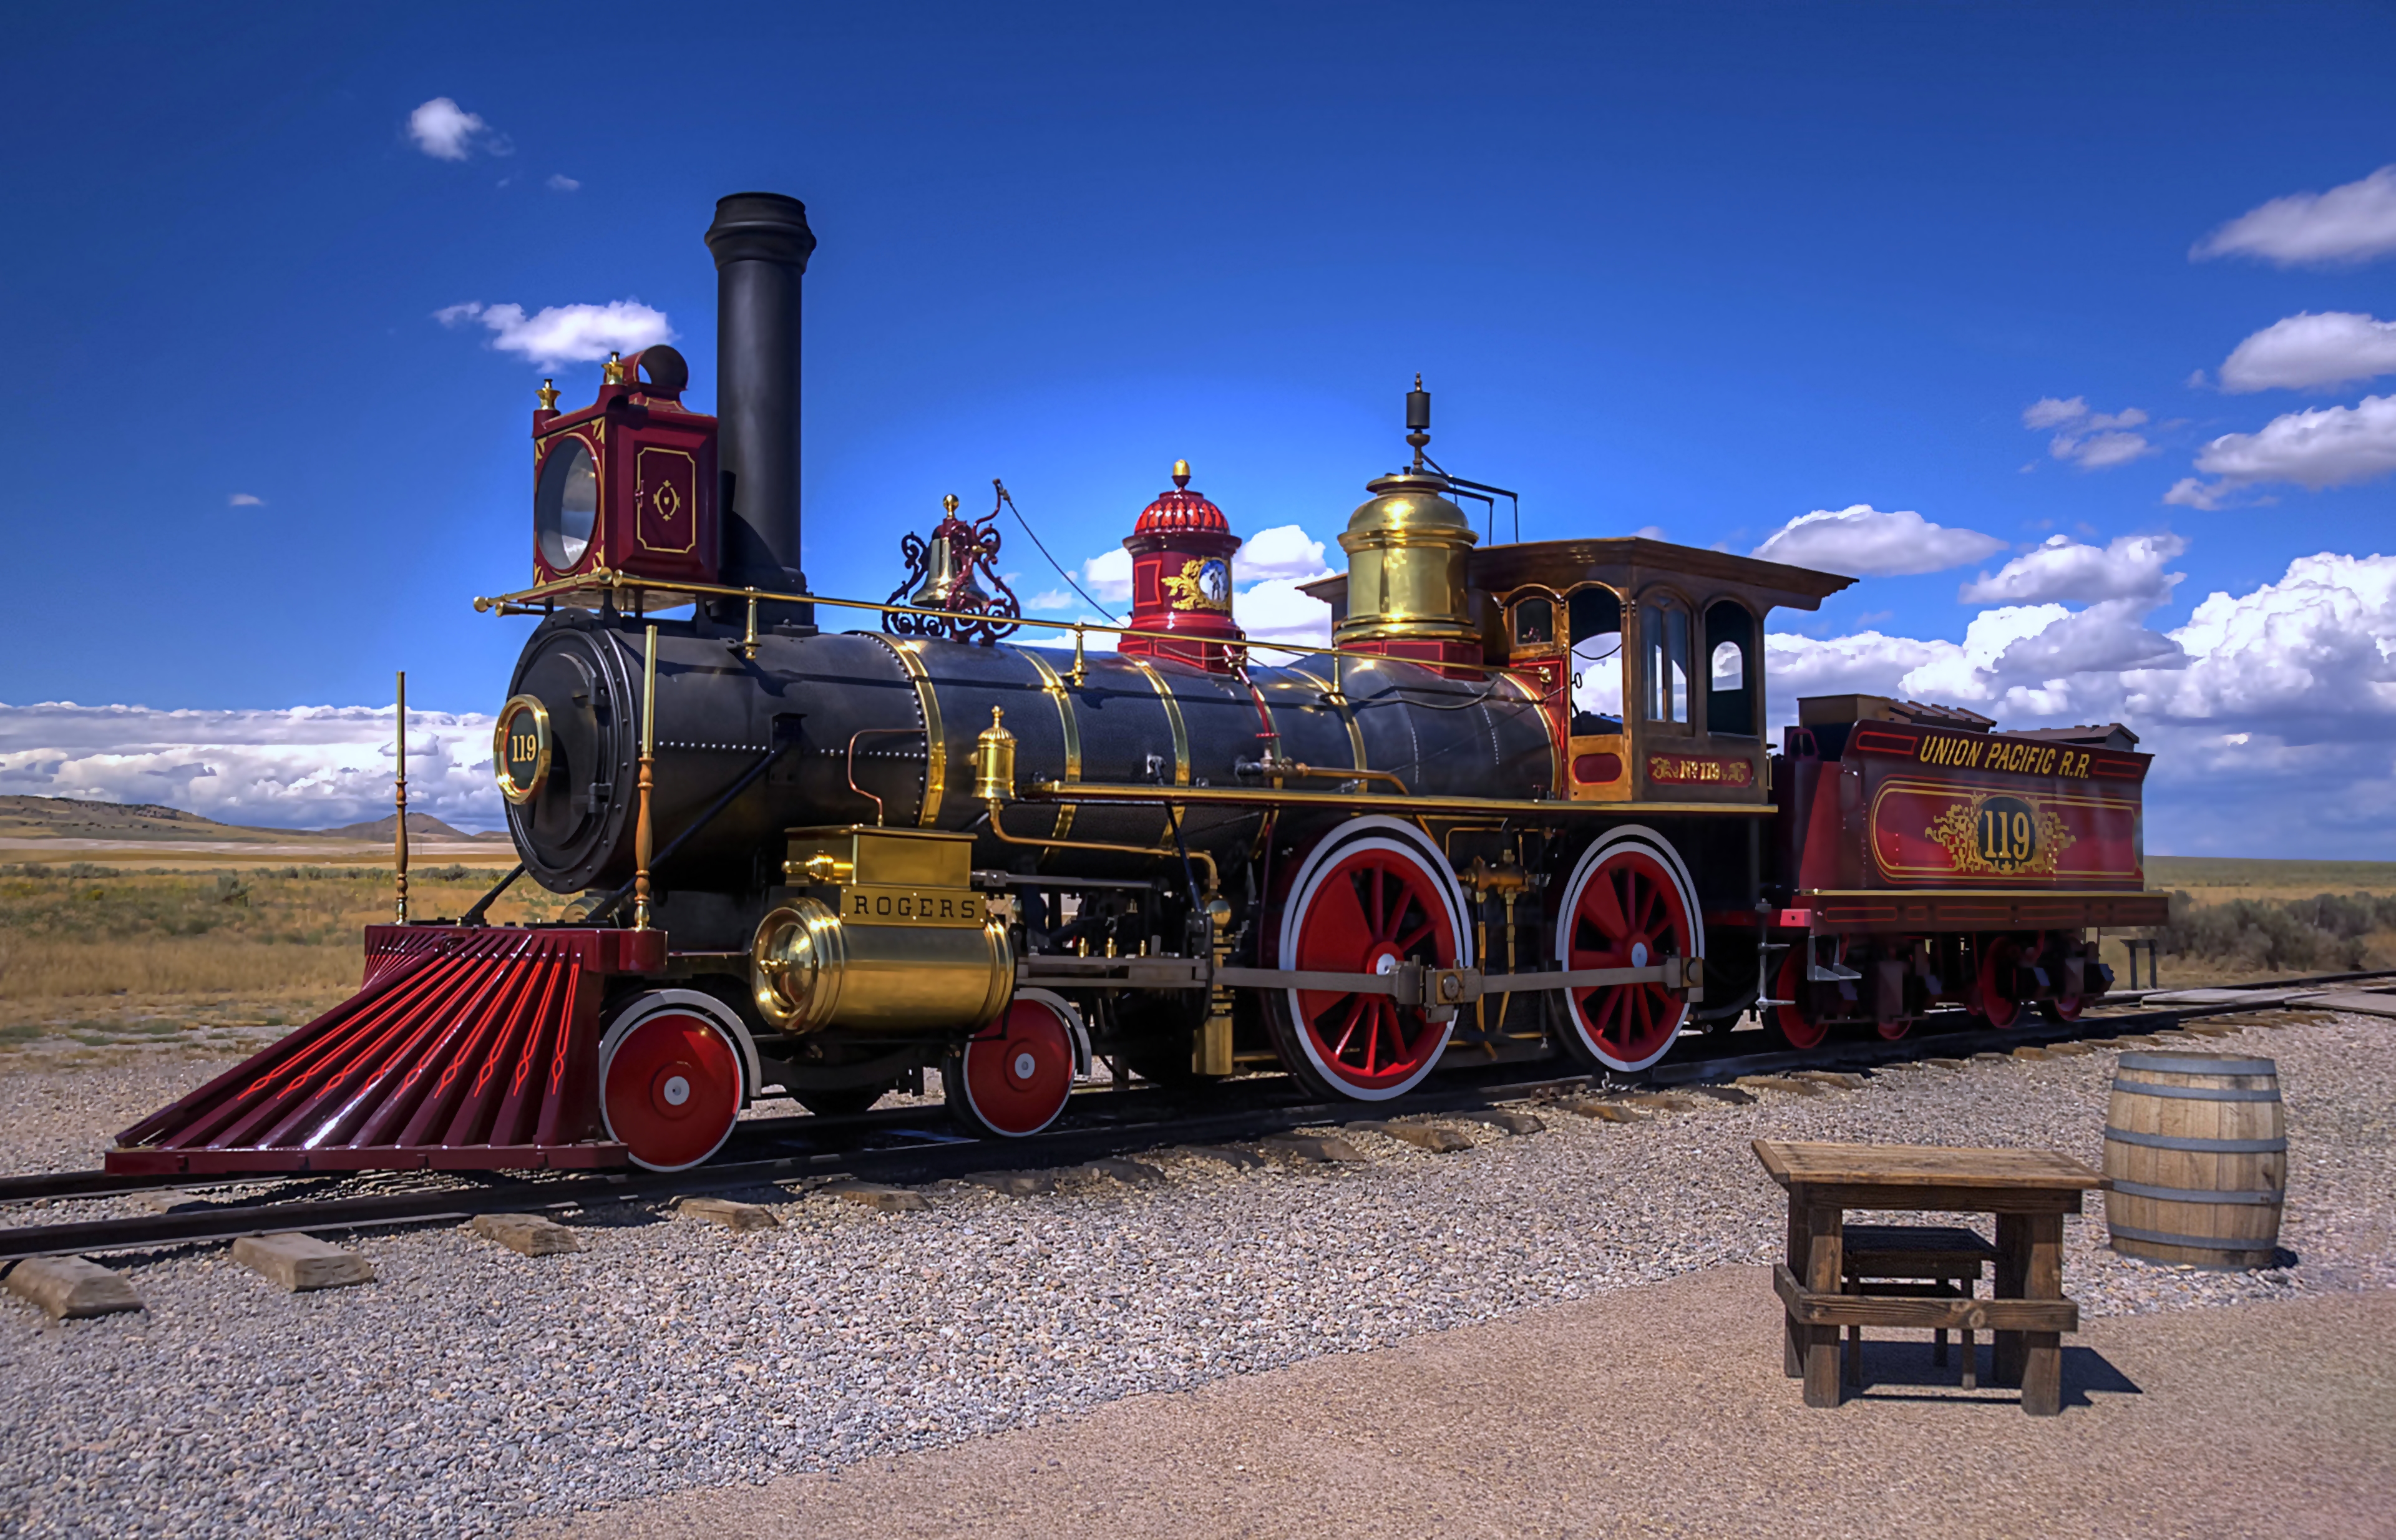 Old Train 4k Ultra HD Wallpaper and Background Image | 3840x2468 ...